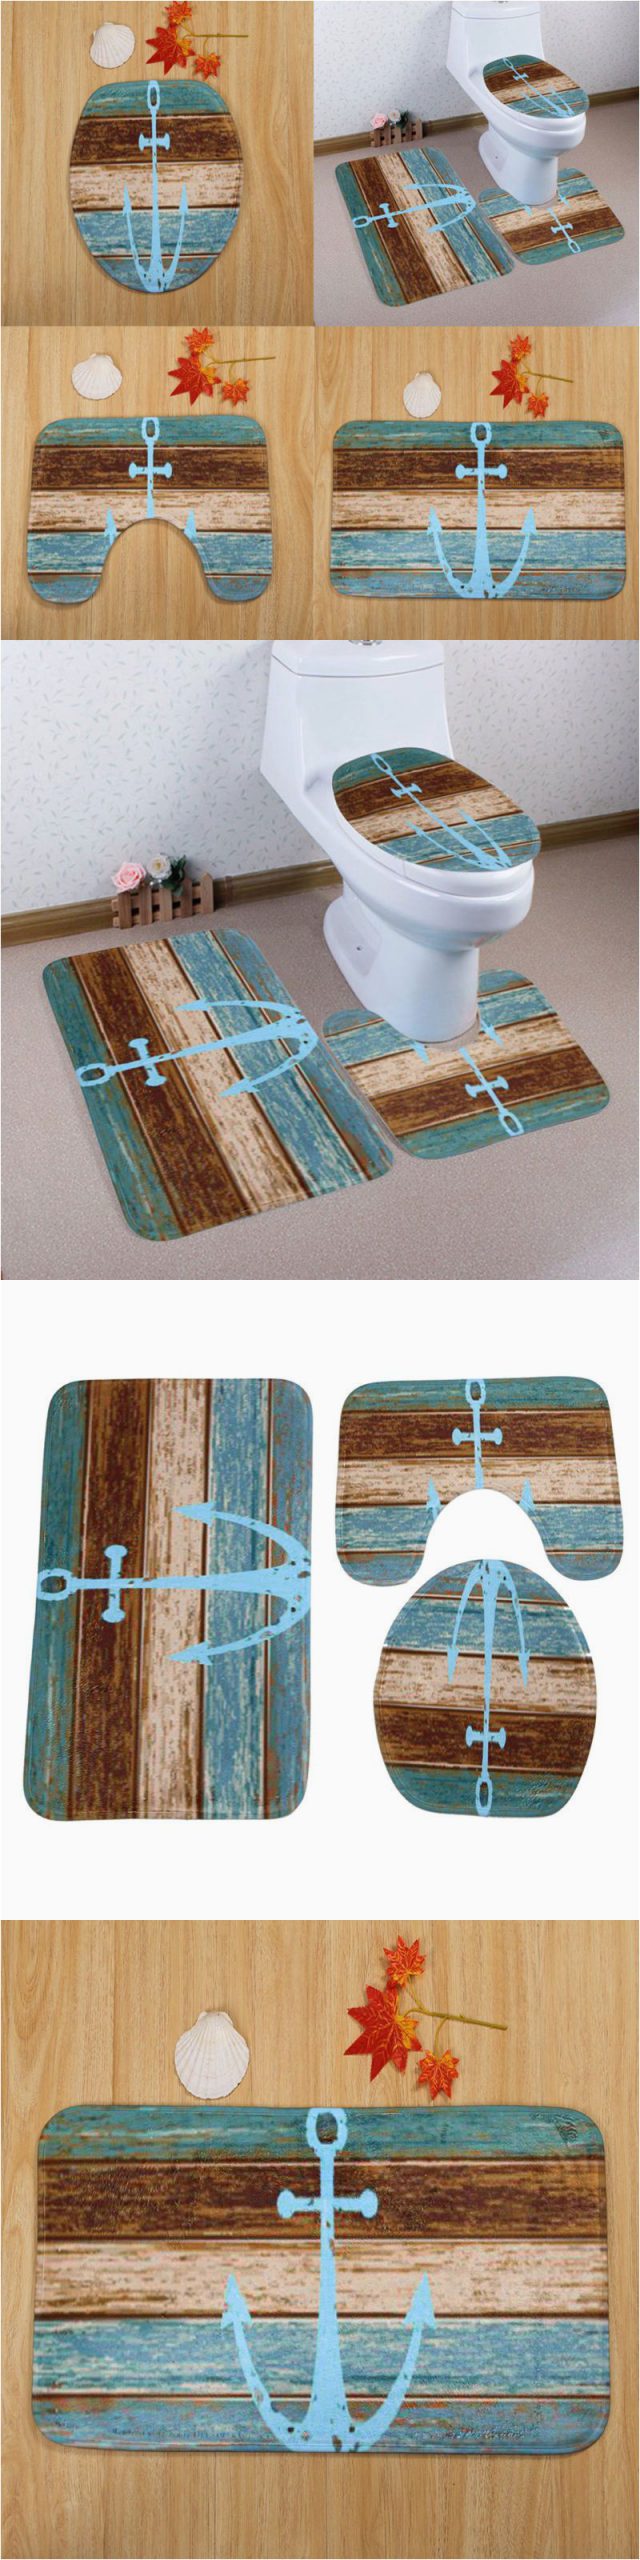 Master Bathroom Rug Sets Bathmats Rugs and toilet Covers 3 Piece Nautical